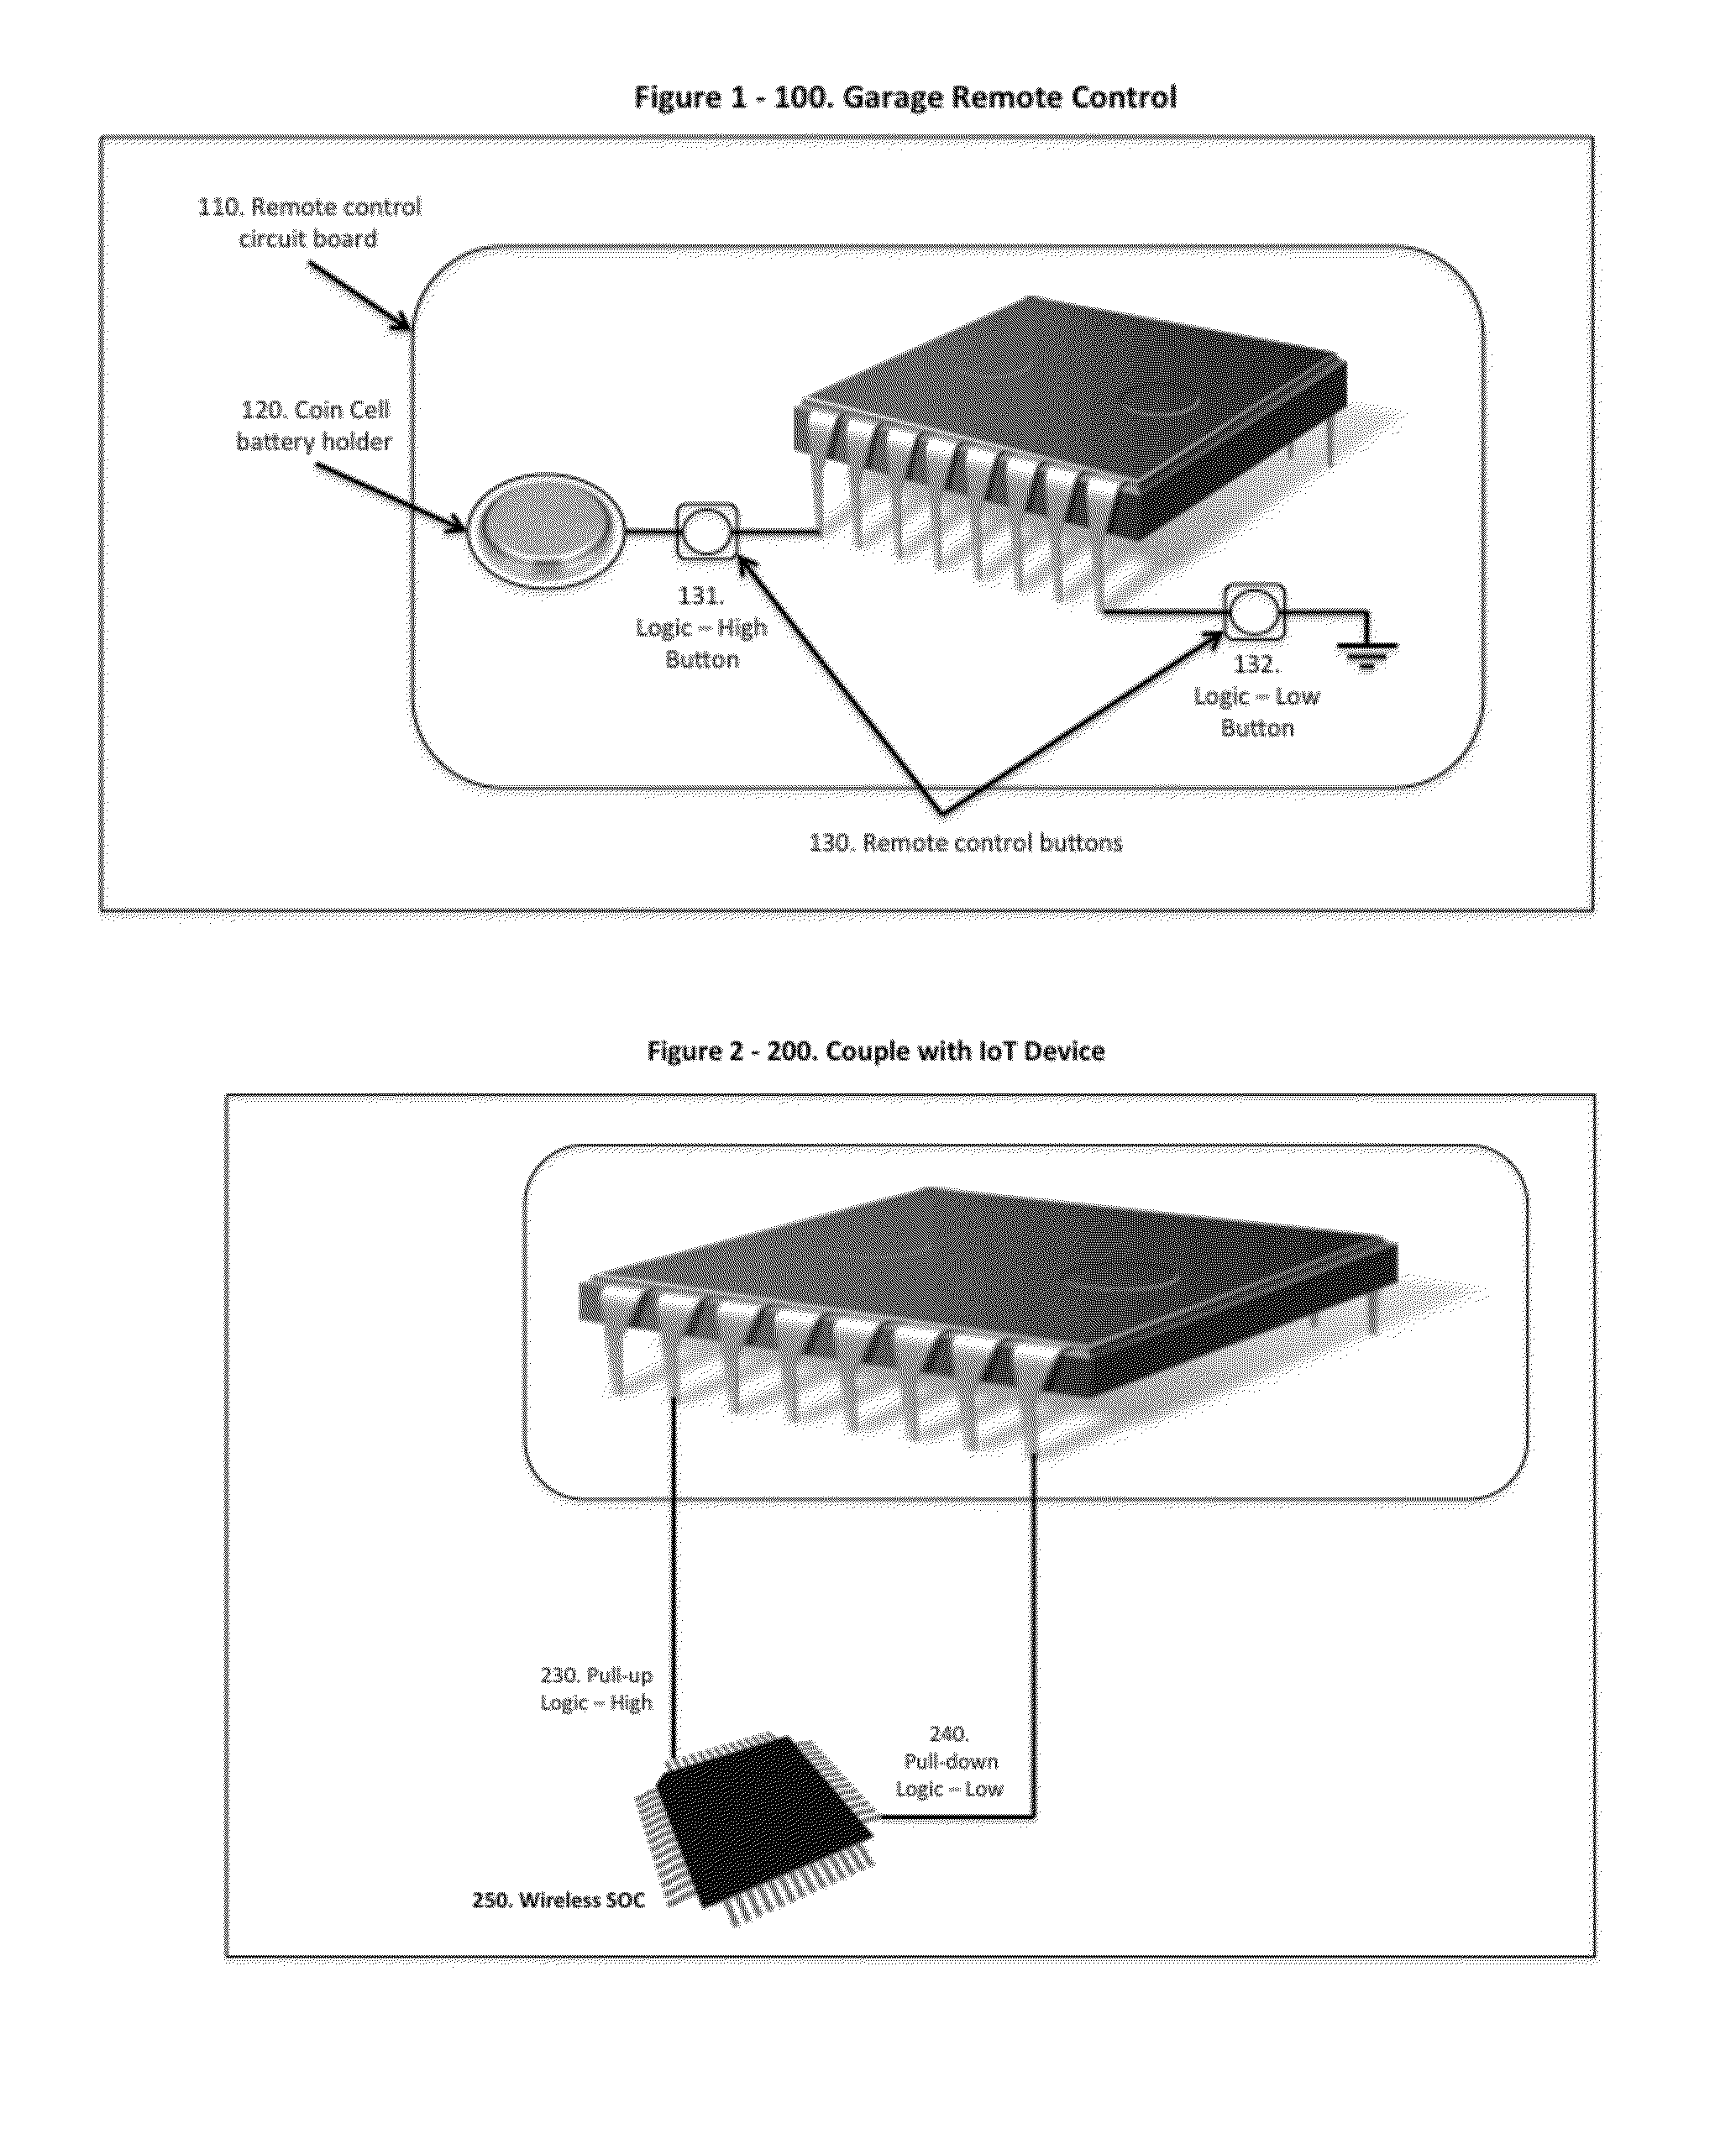 METHOD, SYSTEM, and COMPUTER-READABLE MEDIUM RELATING TO INTERNET of THINGS-ENABLED REMOTE CONTROLS